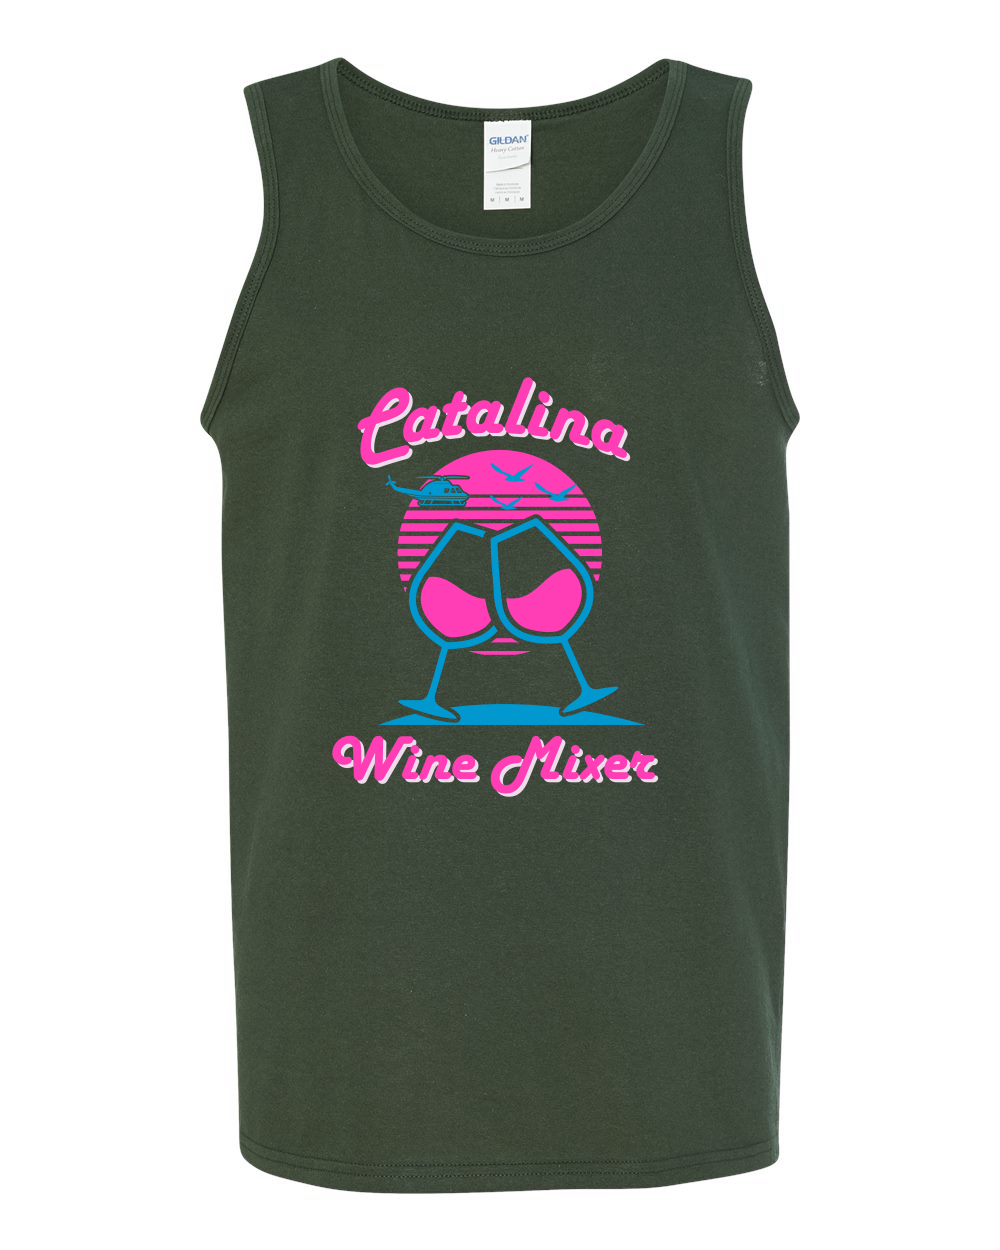 Catalina Wine Mixer Island Prestige Movie| Mens Pop Culture Graphic Tank Top, Forest Green, Large - image 2 of 4